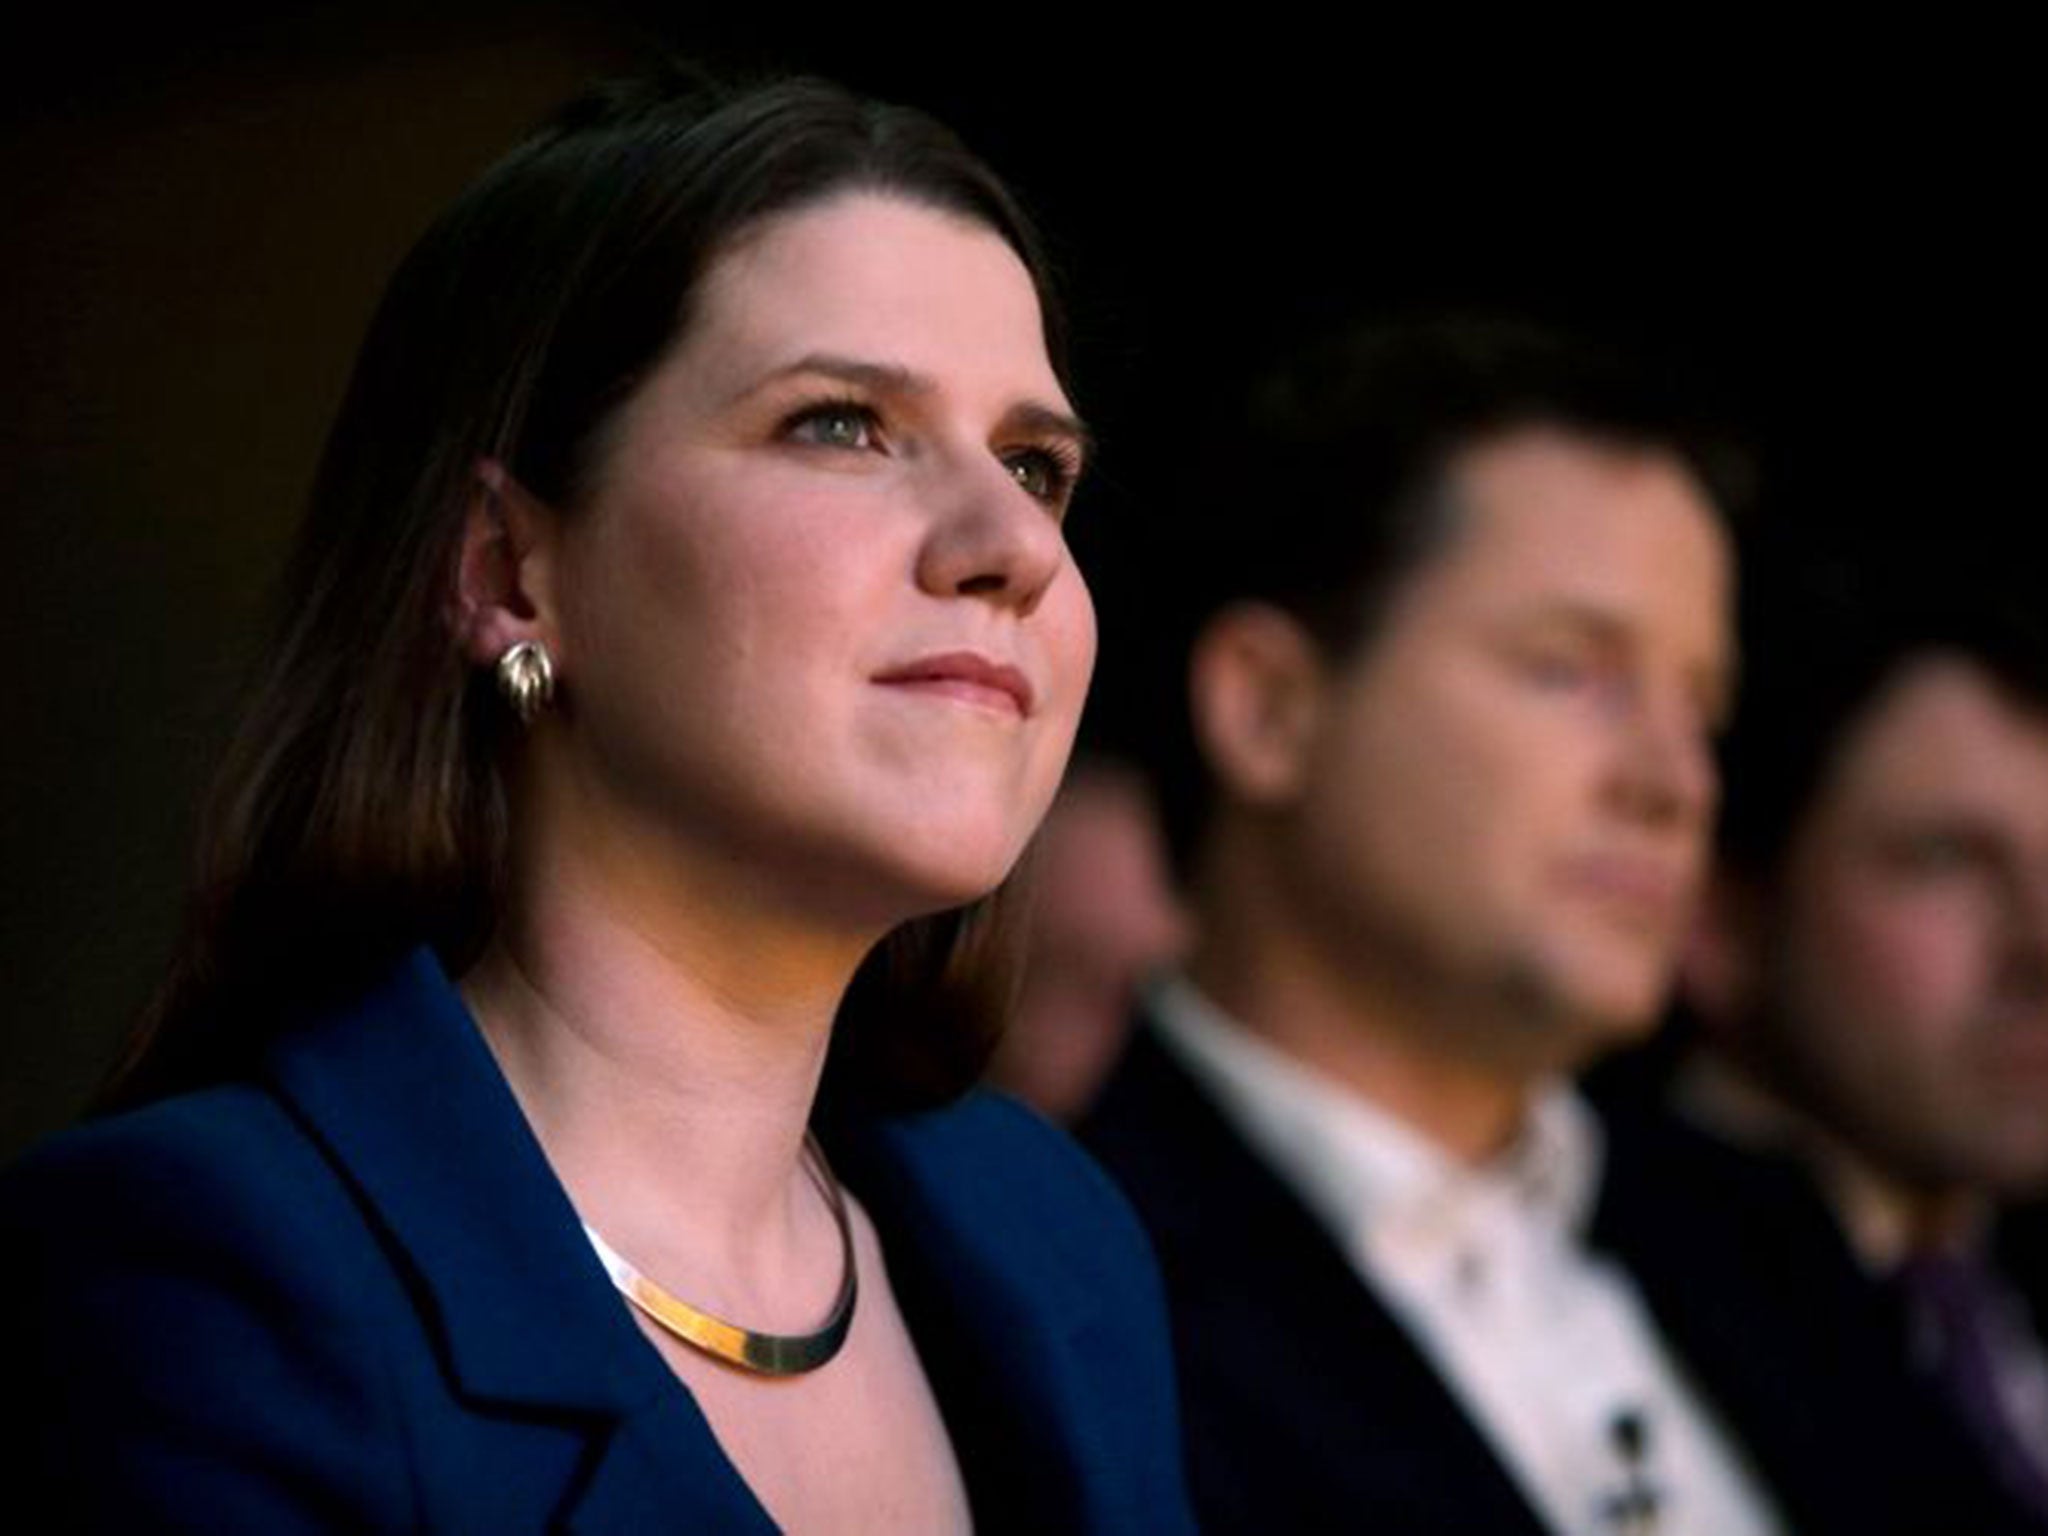 Jo Swinson is tipped as the next leader of the Liberal Democrats – but she should face a tough contest for the role